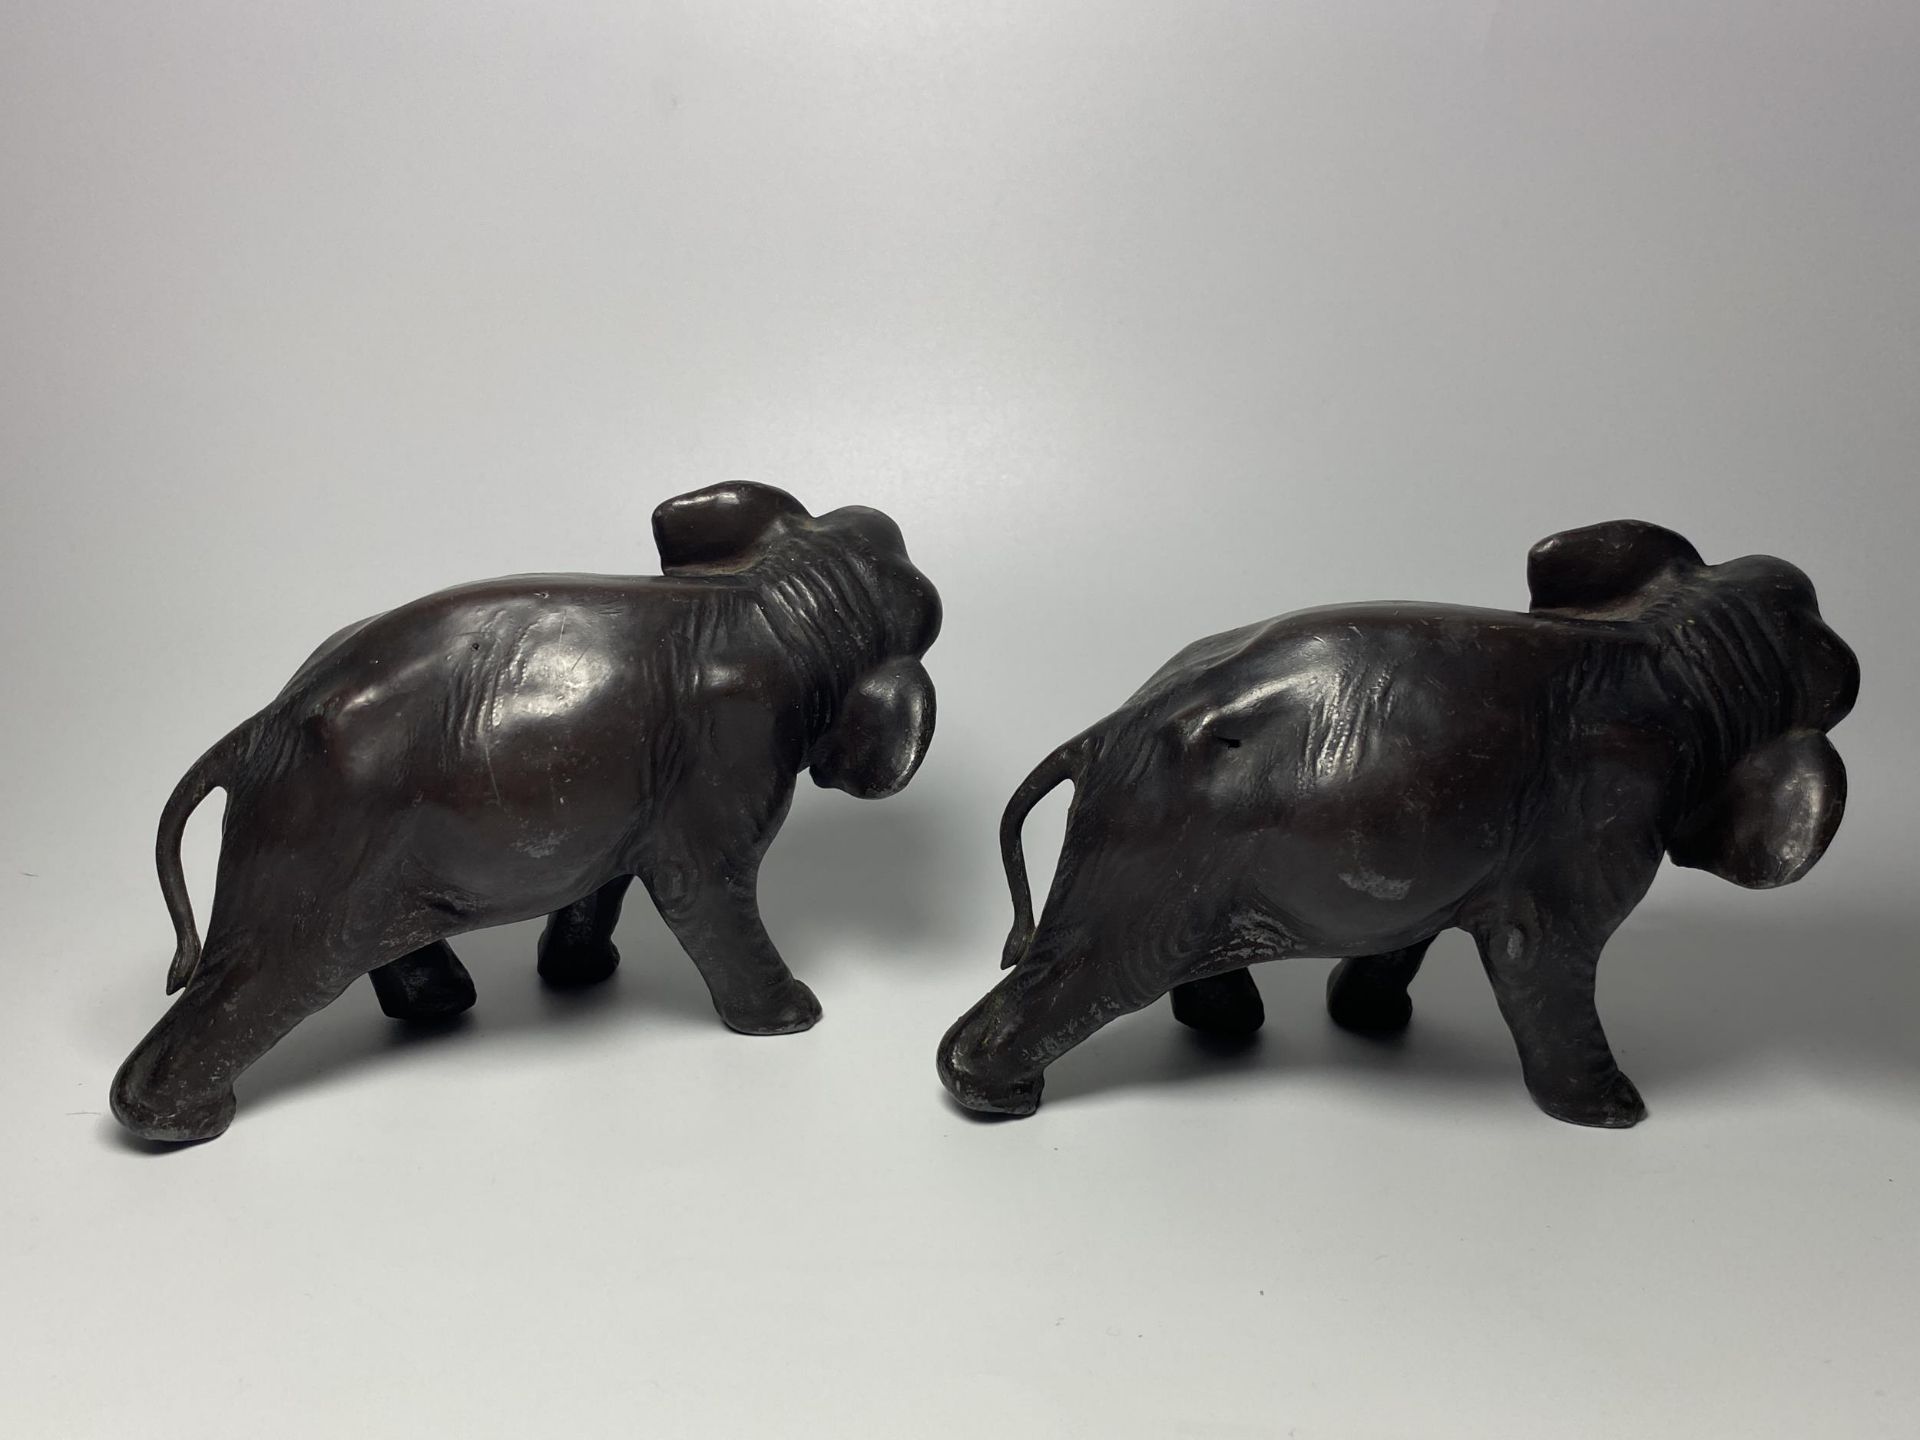 A PAIR OF EARLY 20TH CENTURY JAPANESE METAL MODELS OF ELEPHANTS, 10 X 14CM - Image 4 of 7